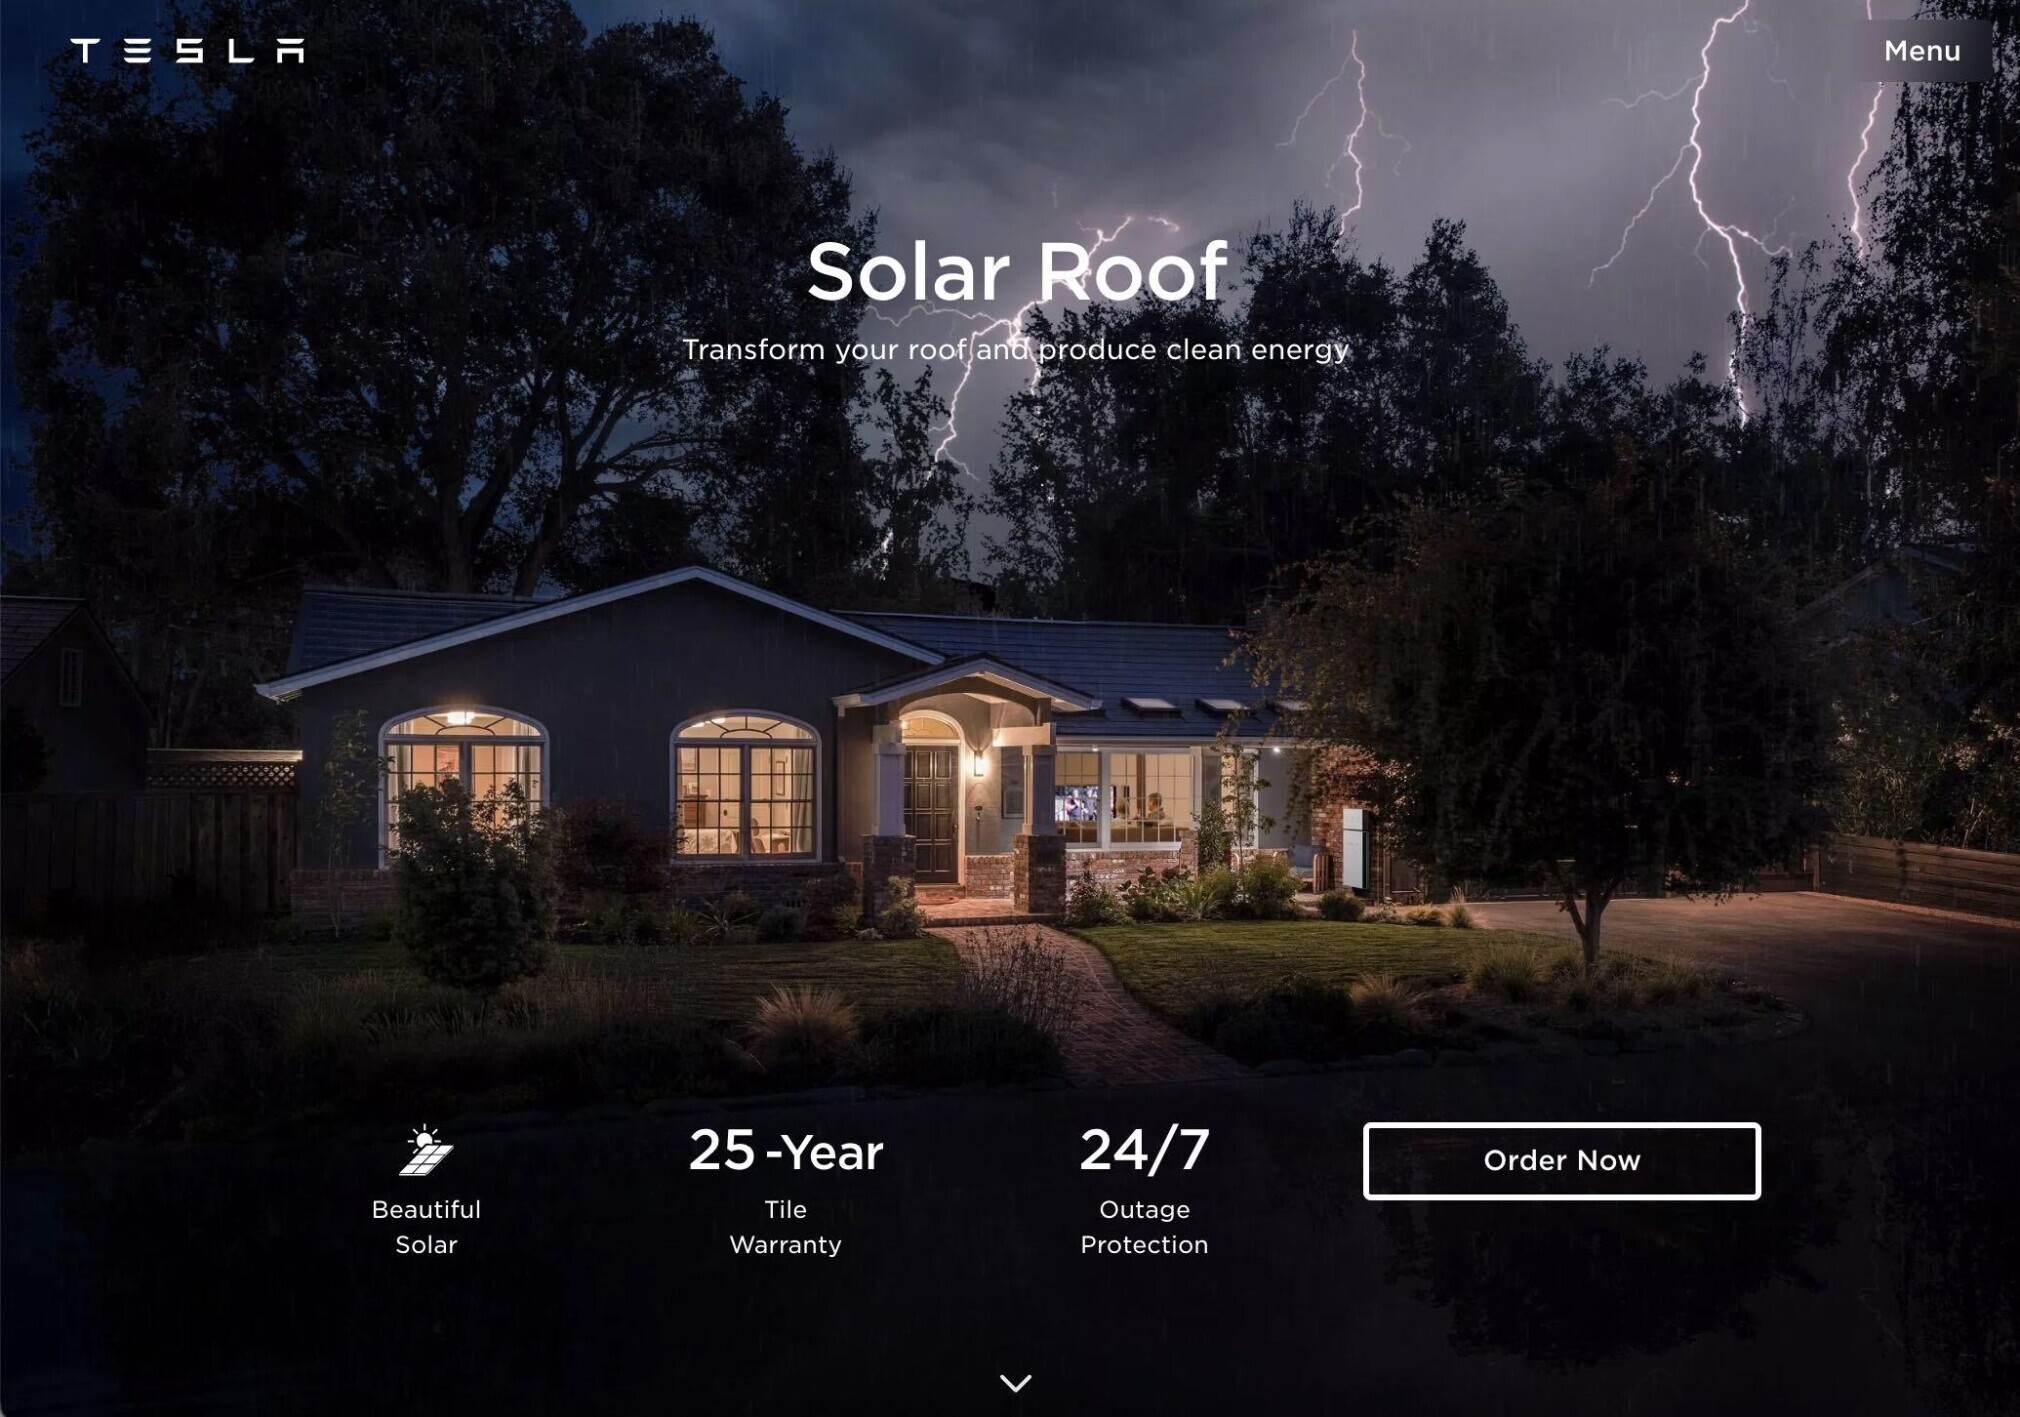 Tesla's solar roof landing page with an image of a house going through a lightning storm